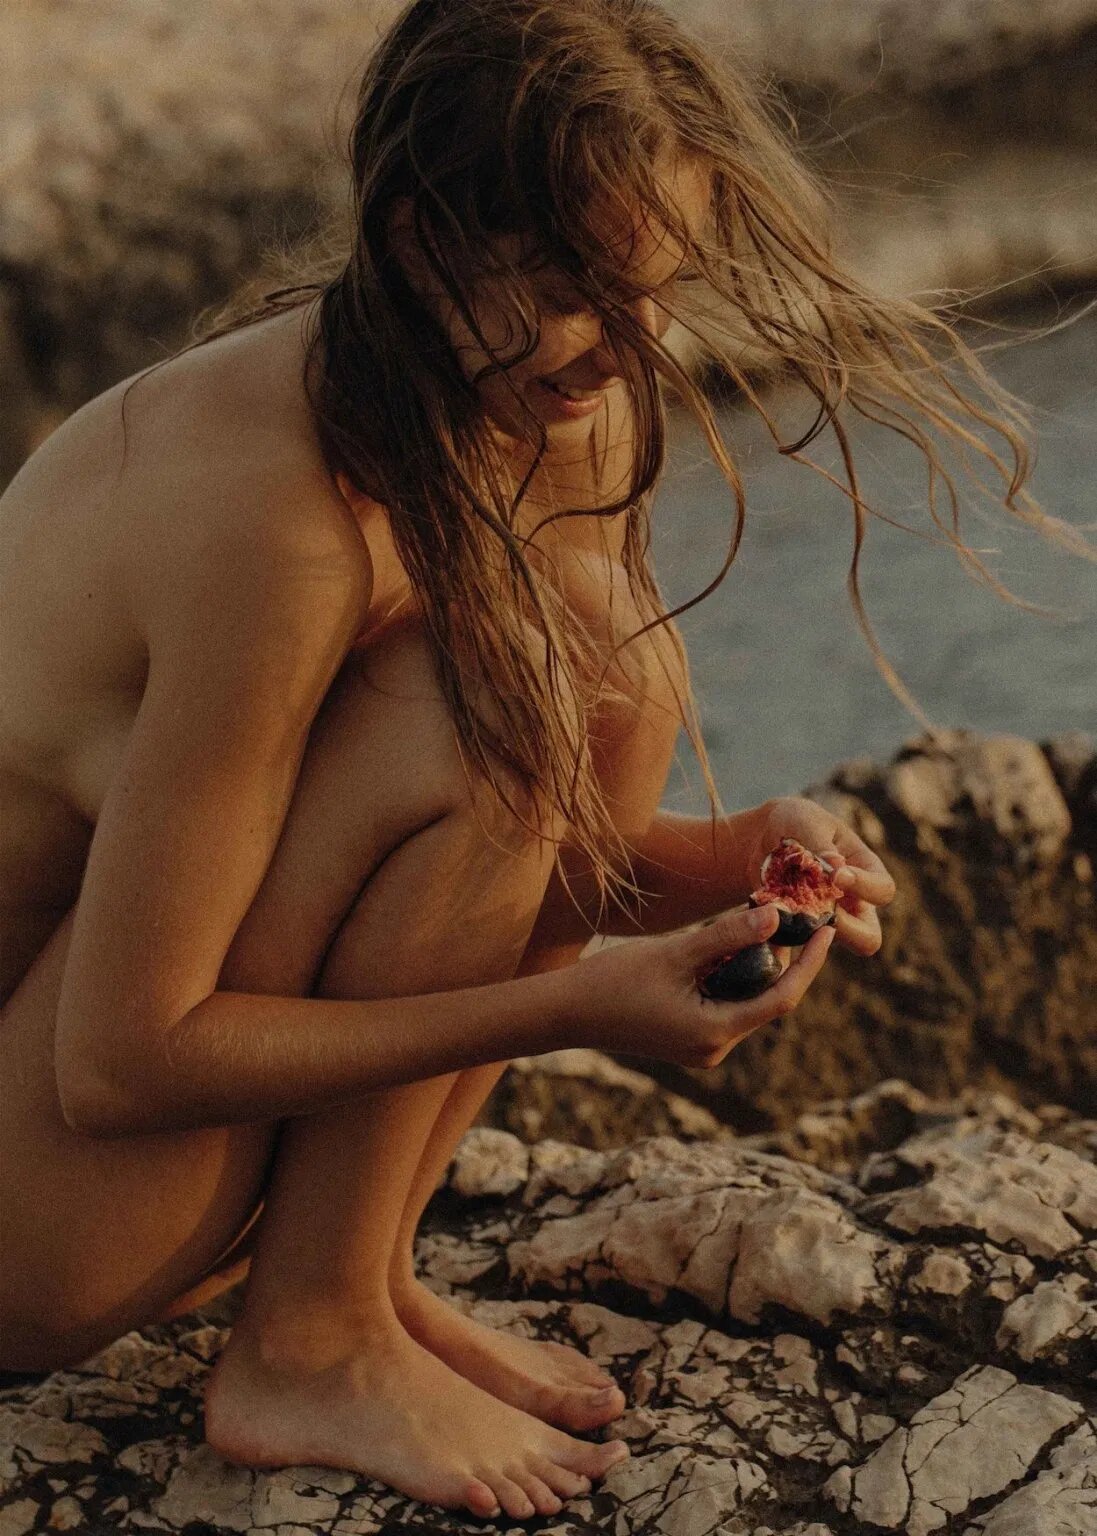 Victoria Mottet Nude By The Sea.